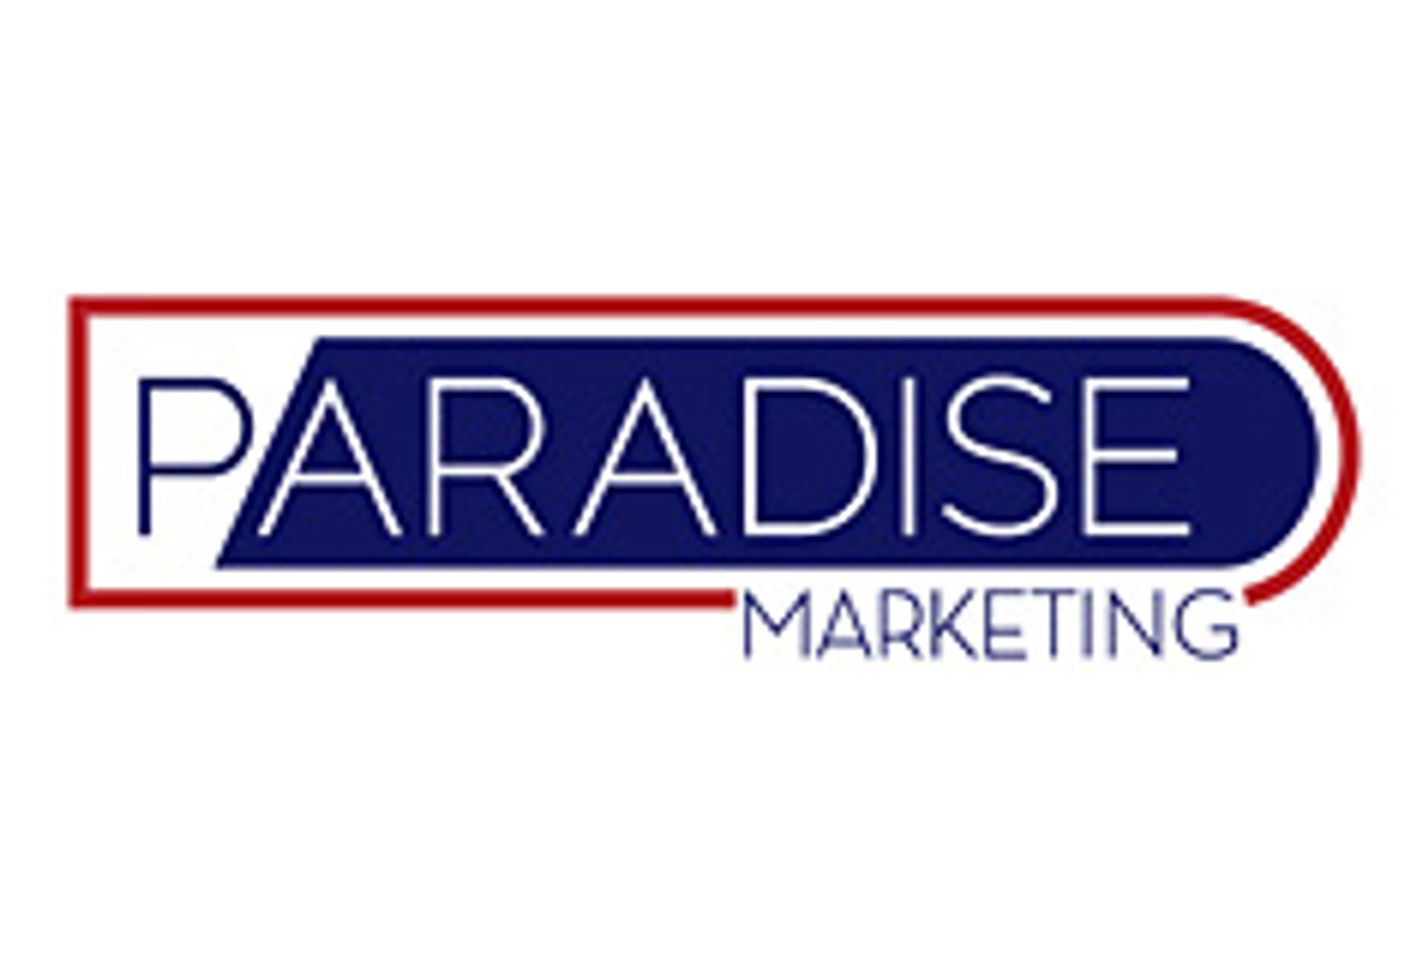 Paradise Marketing, Trojan Partner to Bring Midnight Collection to Adult Retail